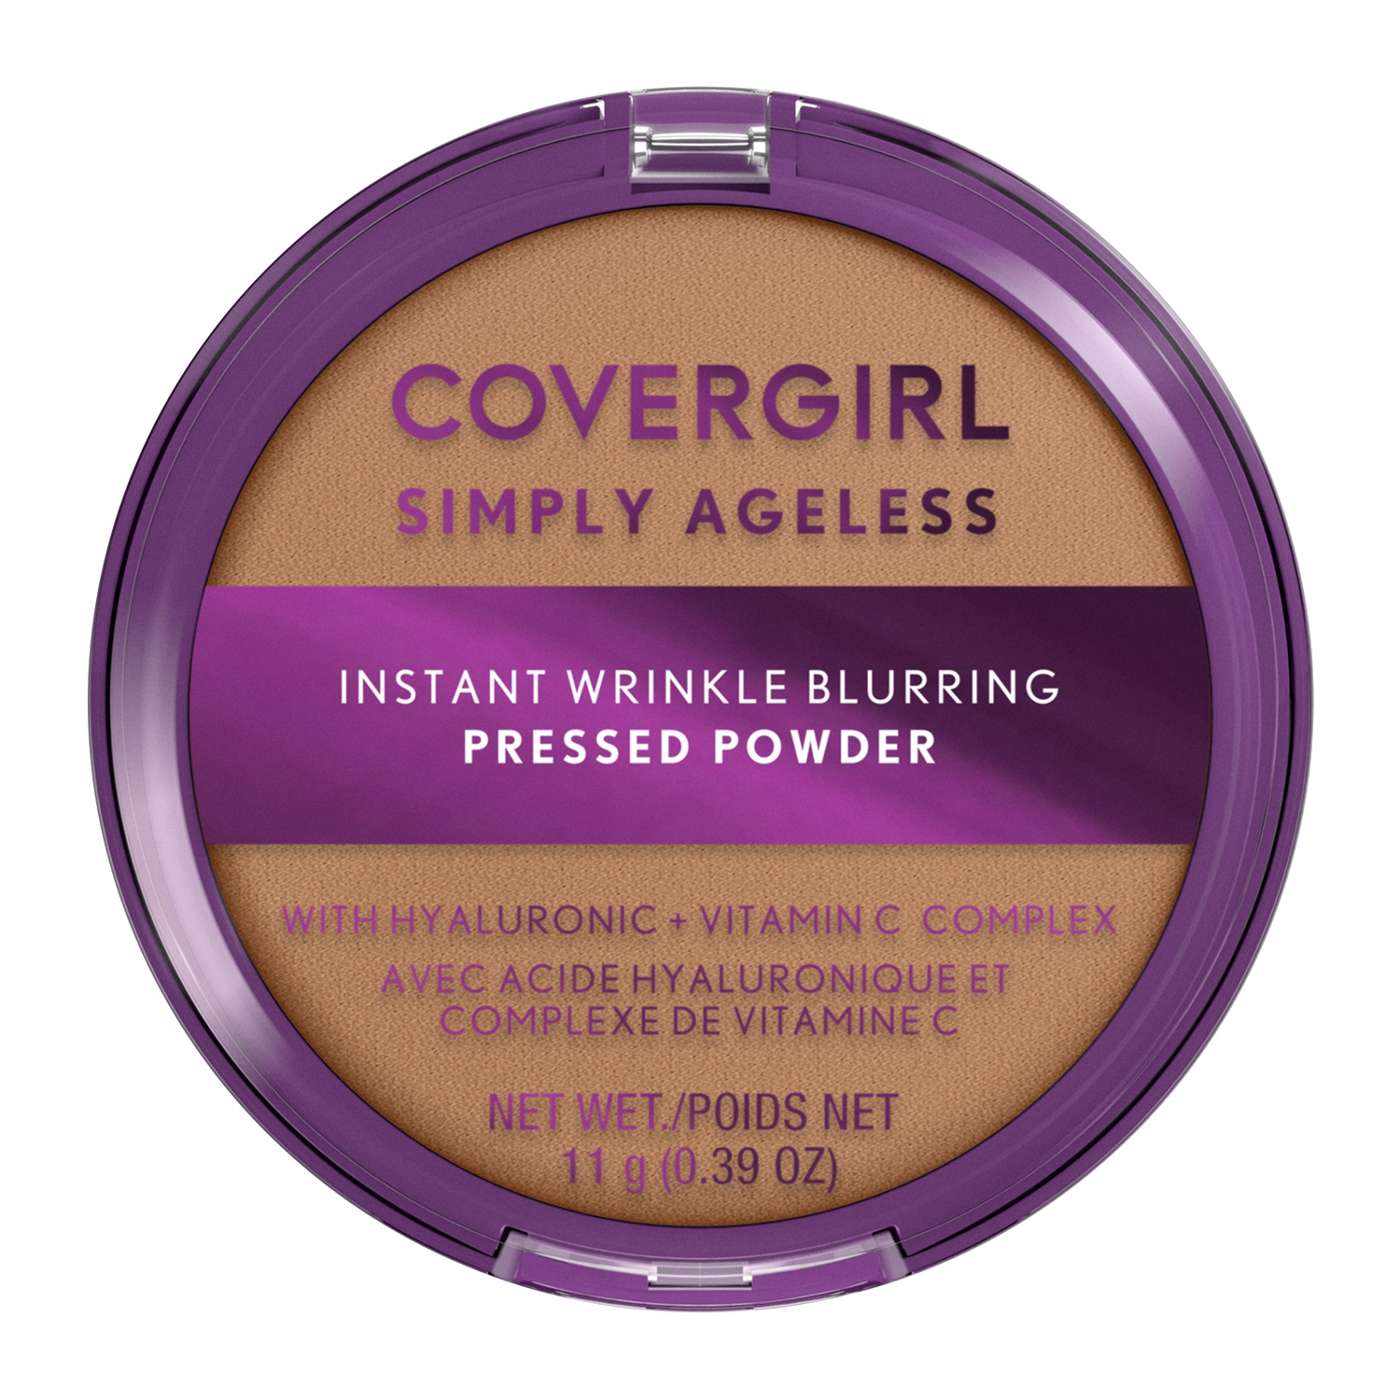 Covergirl Simply Ageless Pressed Powder 255 Soft Honey; image 1 of 10